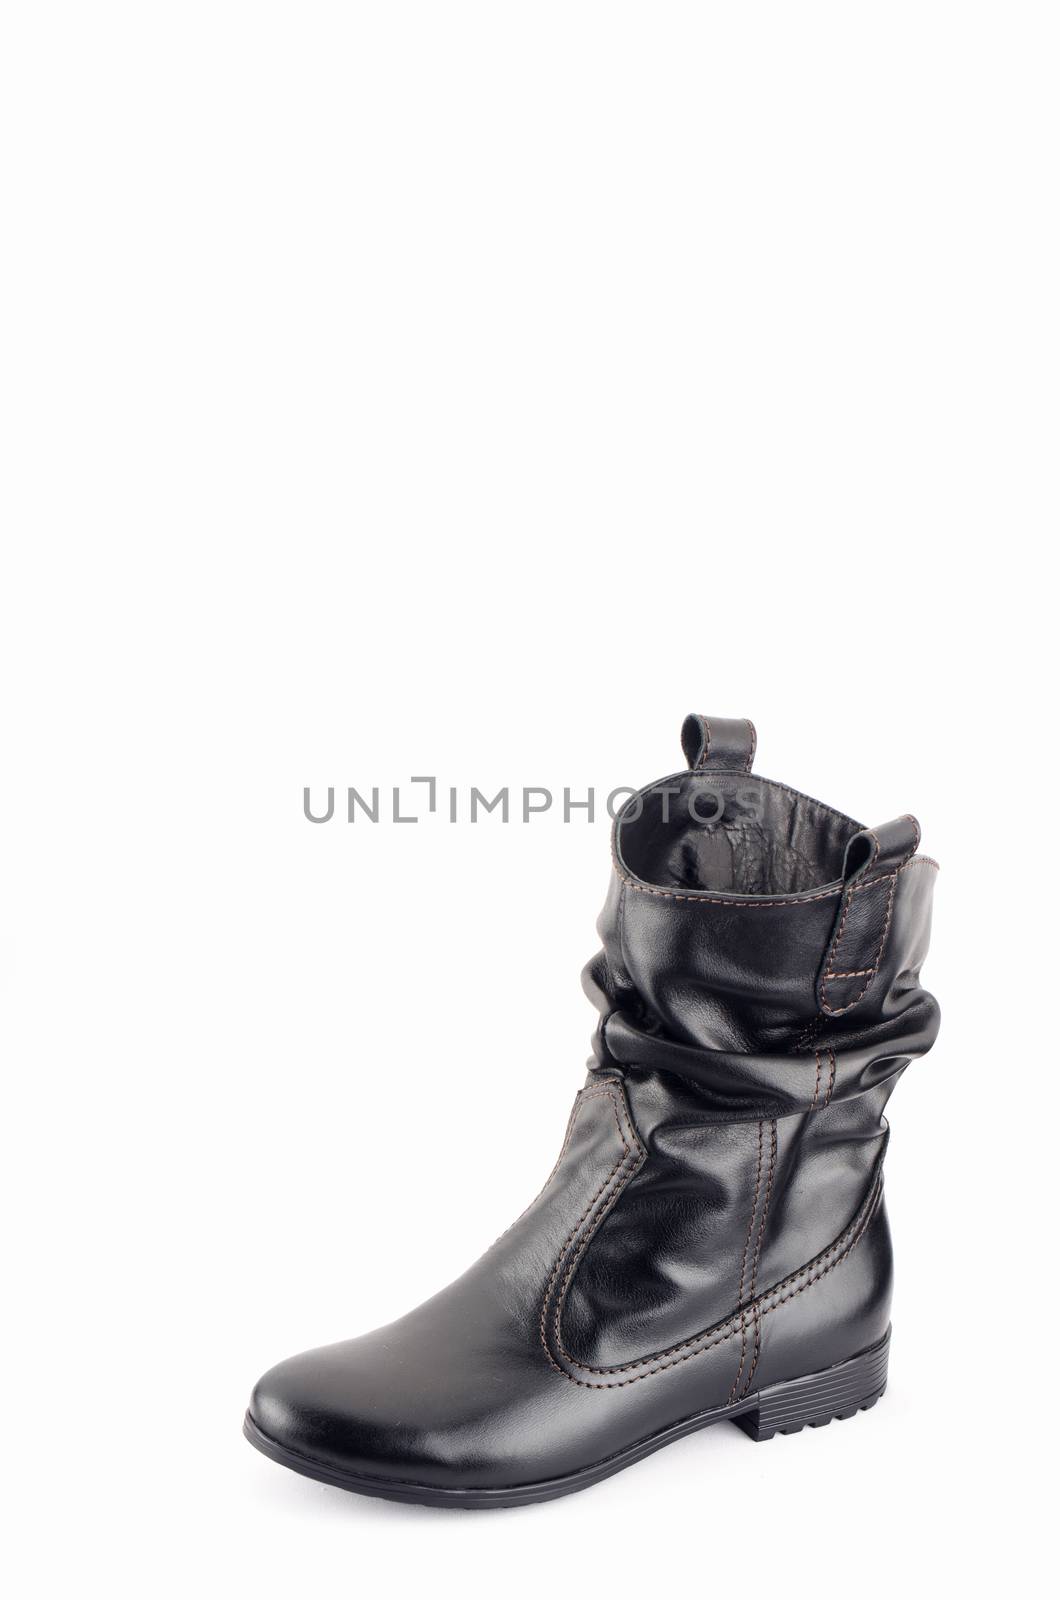 Womens leather boots in black on a white background by Morfey713